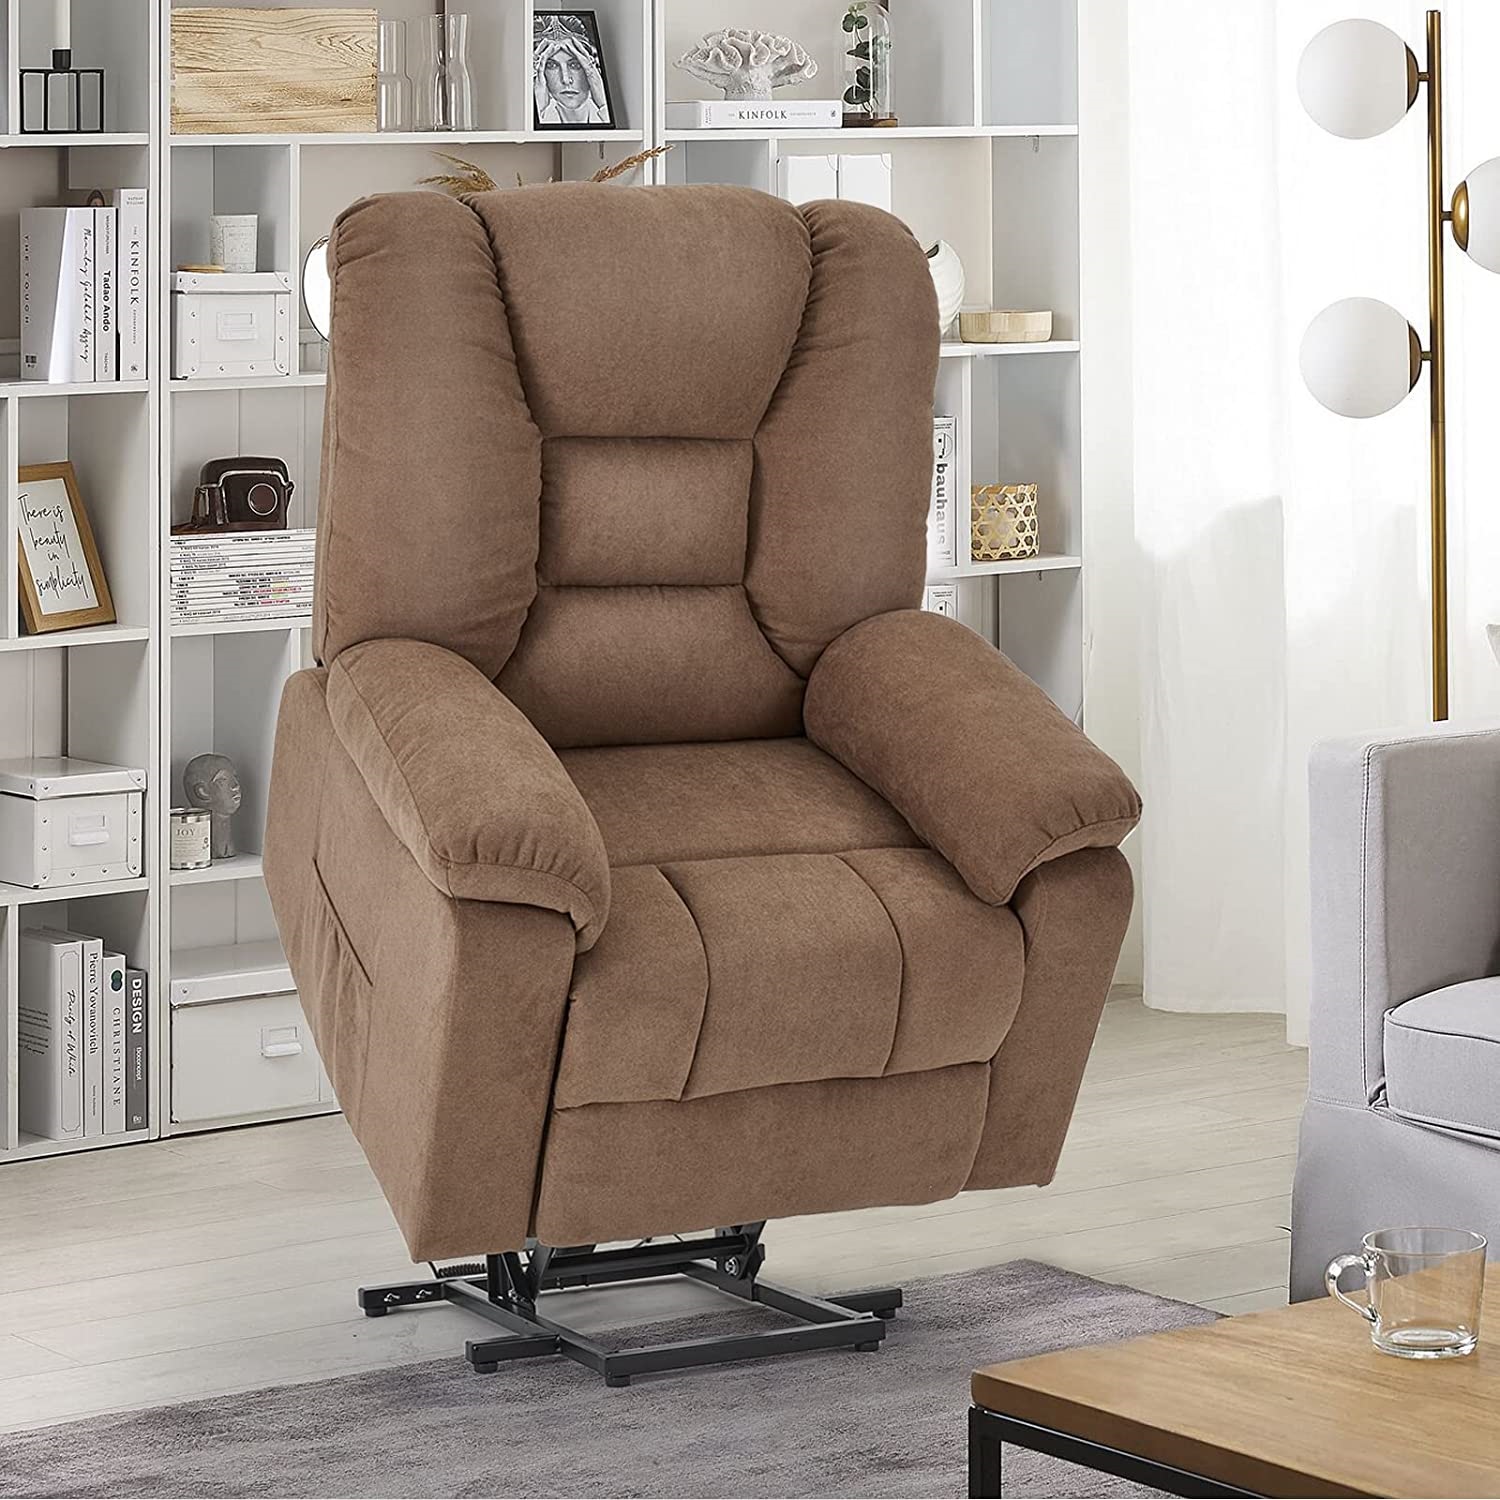 YODOLLA Larger Lift Chair for Elderly, Big and Tall Lift Recliner with Side Pockets